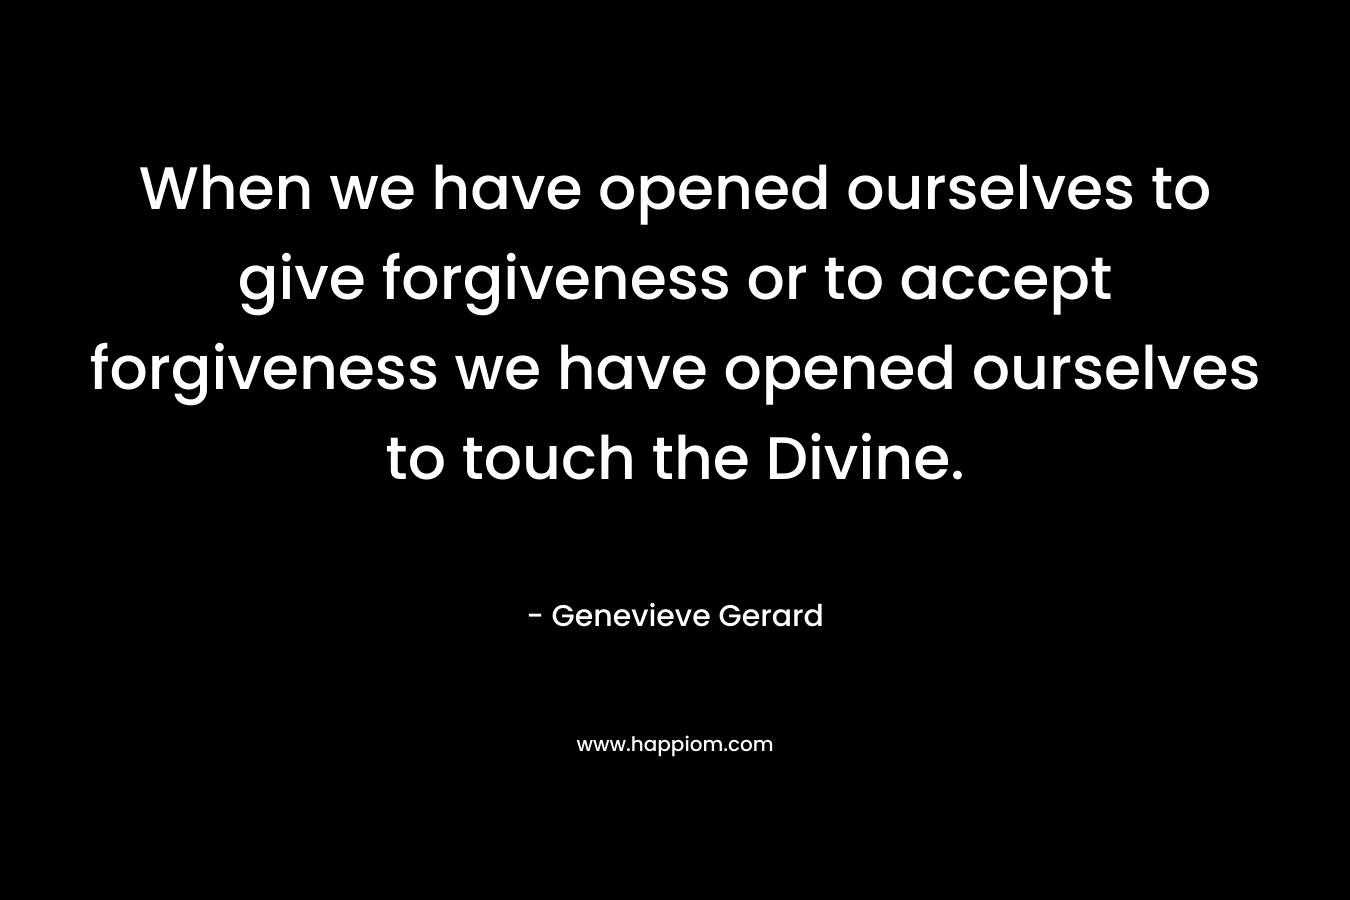 When we have opened ourselves to give forgiveness or to accept forgiveness we have opened ourselves to touch the Divine.